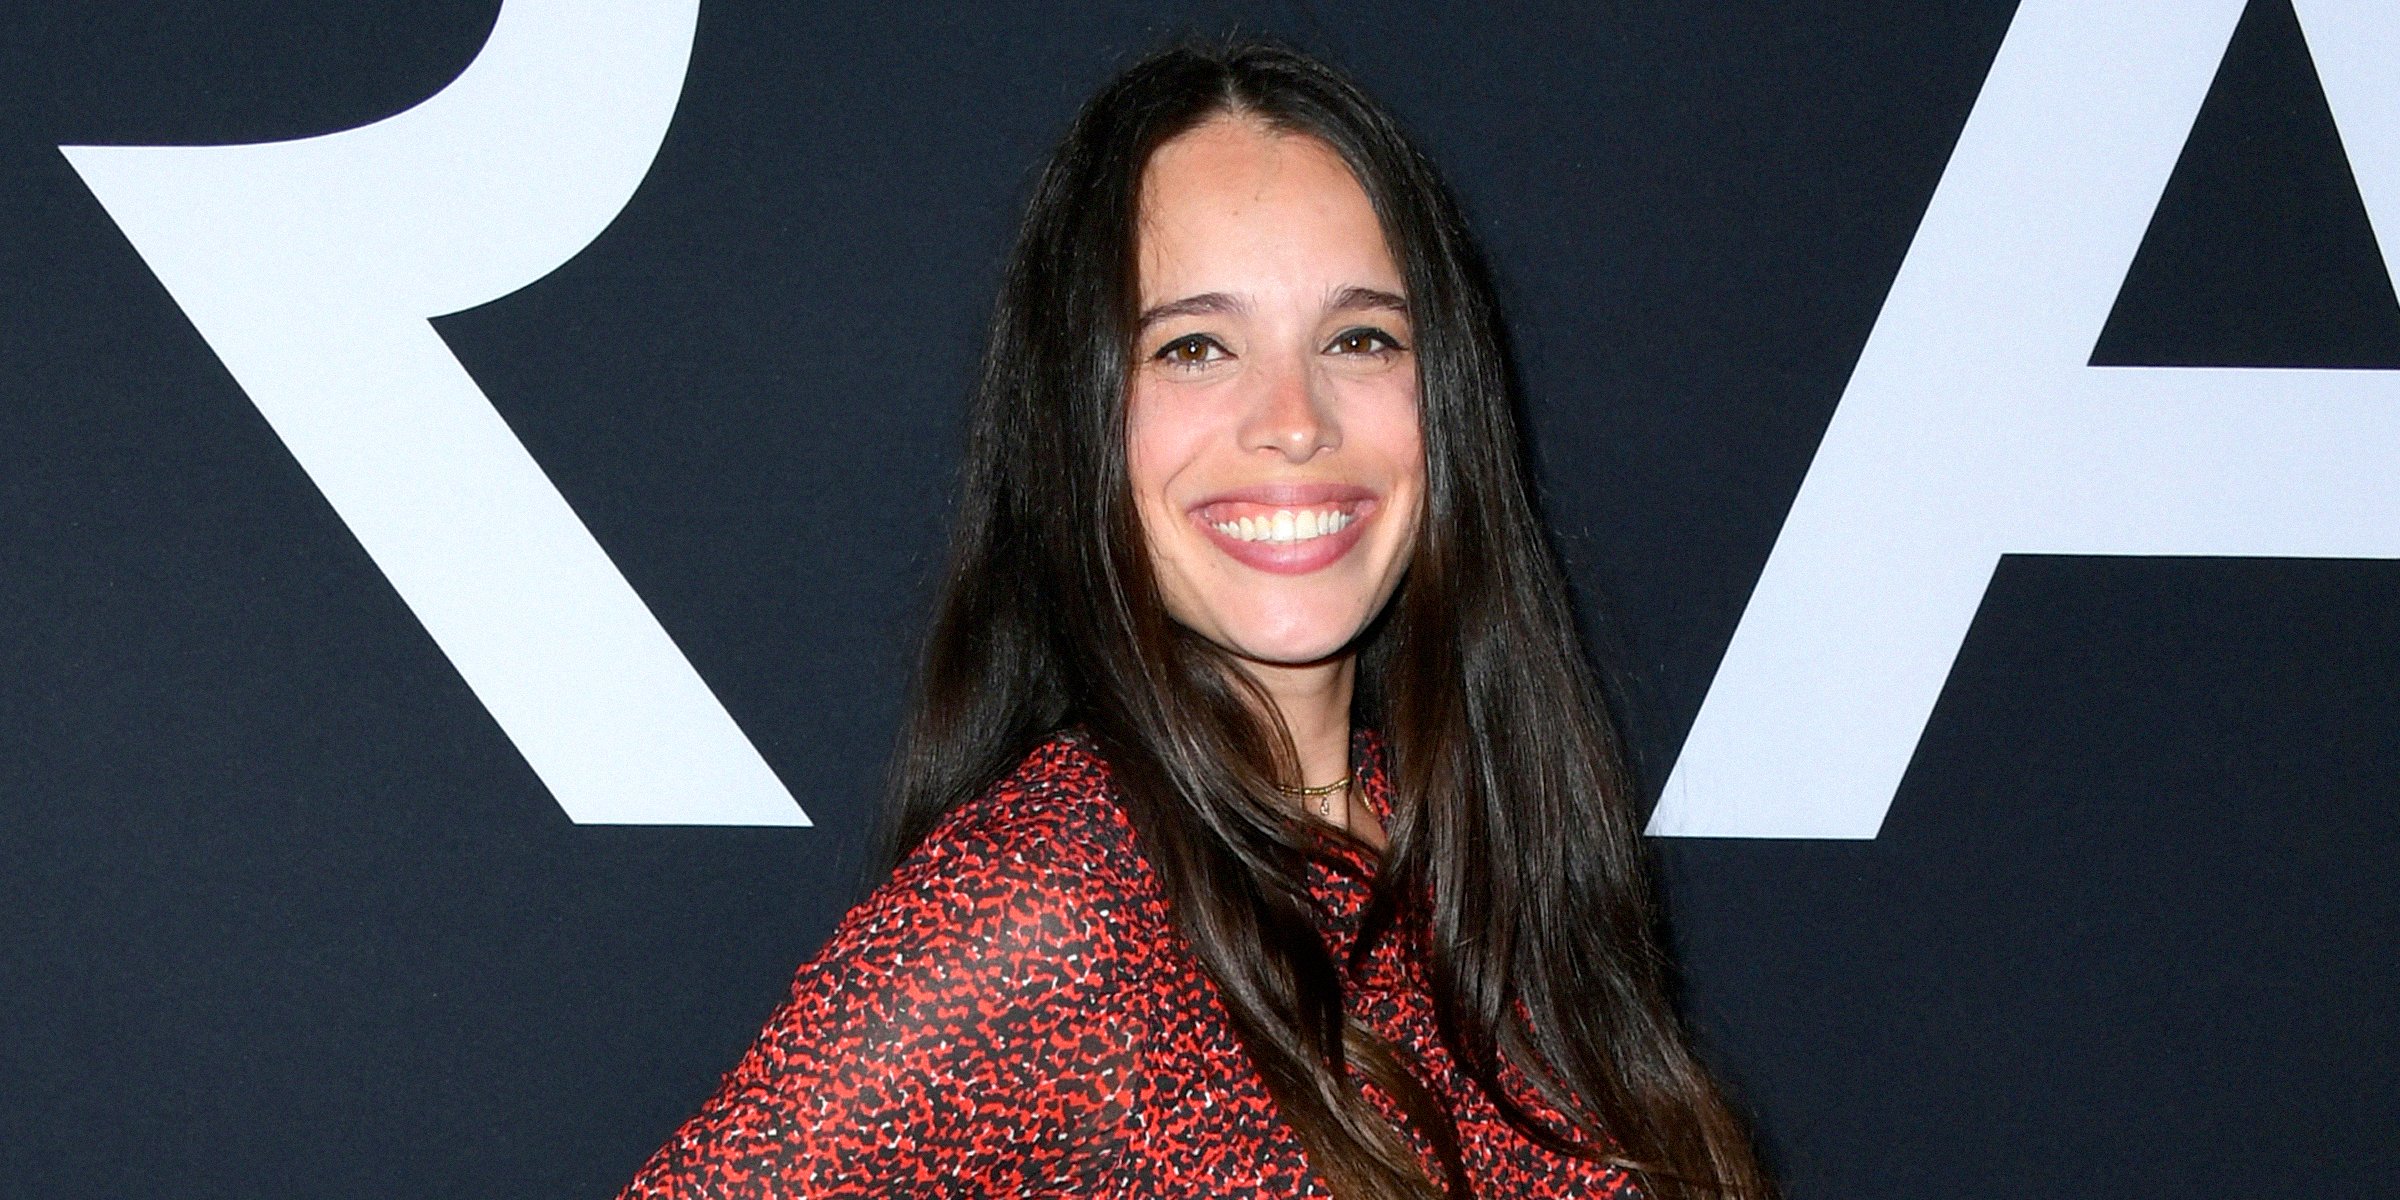 Steven Tyler daughter's Chelsea engaged to marry Ben Foster's brother Jon